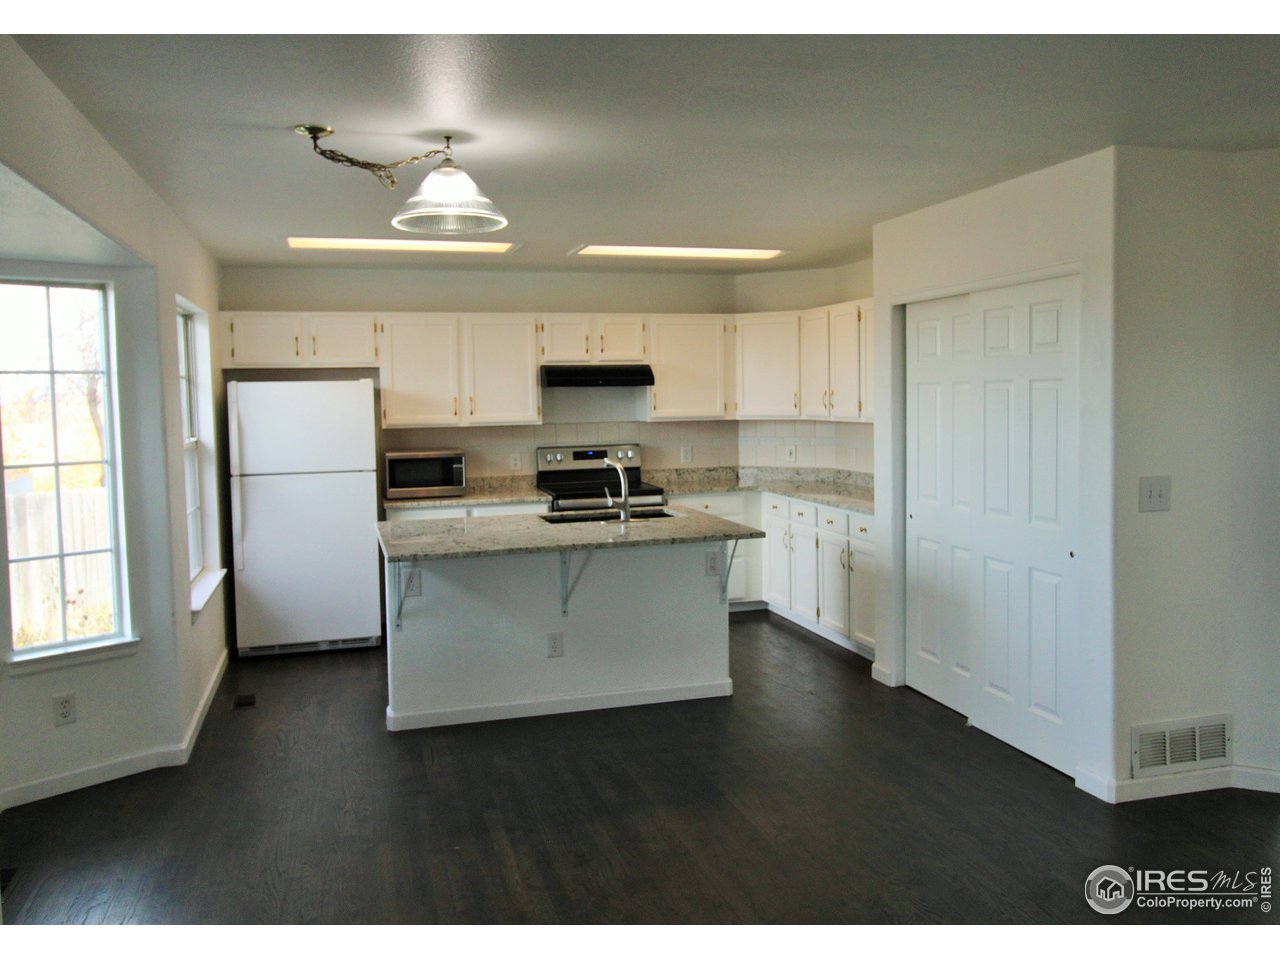 Kitchen has lots of cabinet and counter space + a big double door pantry & hardwood flooring.